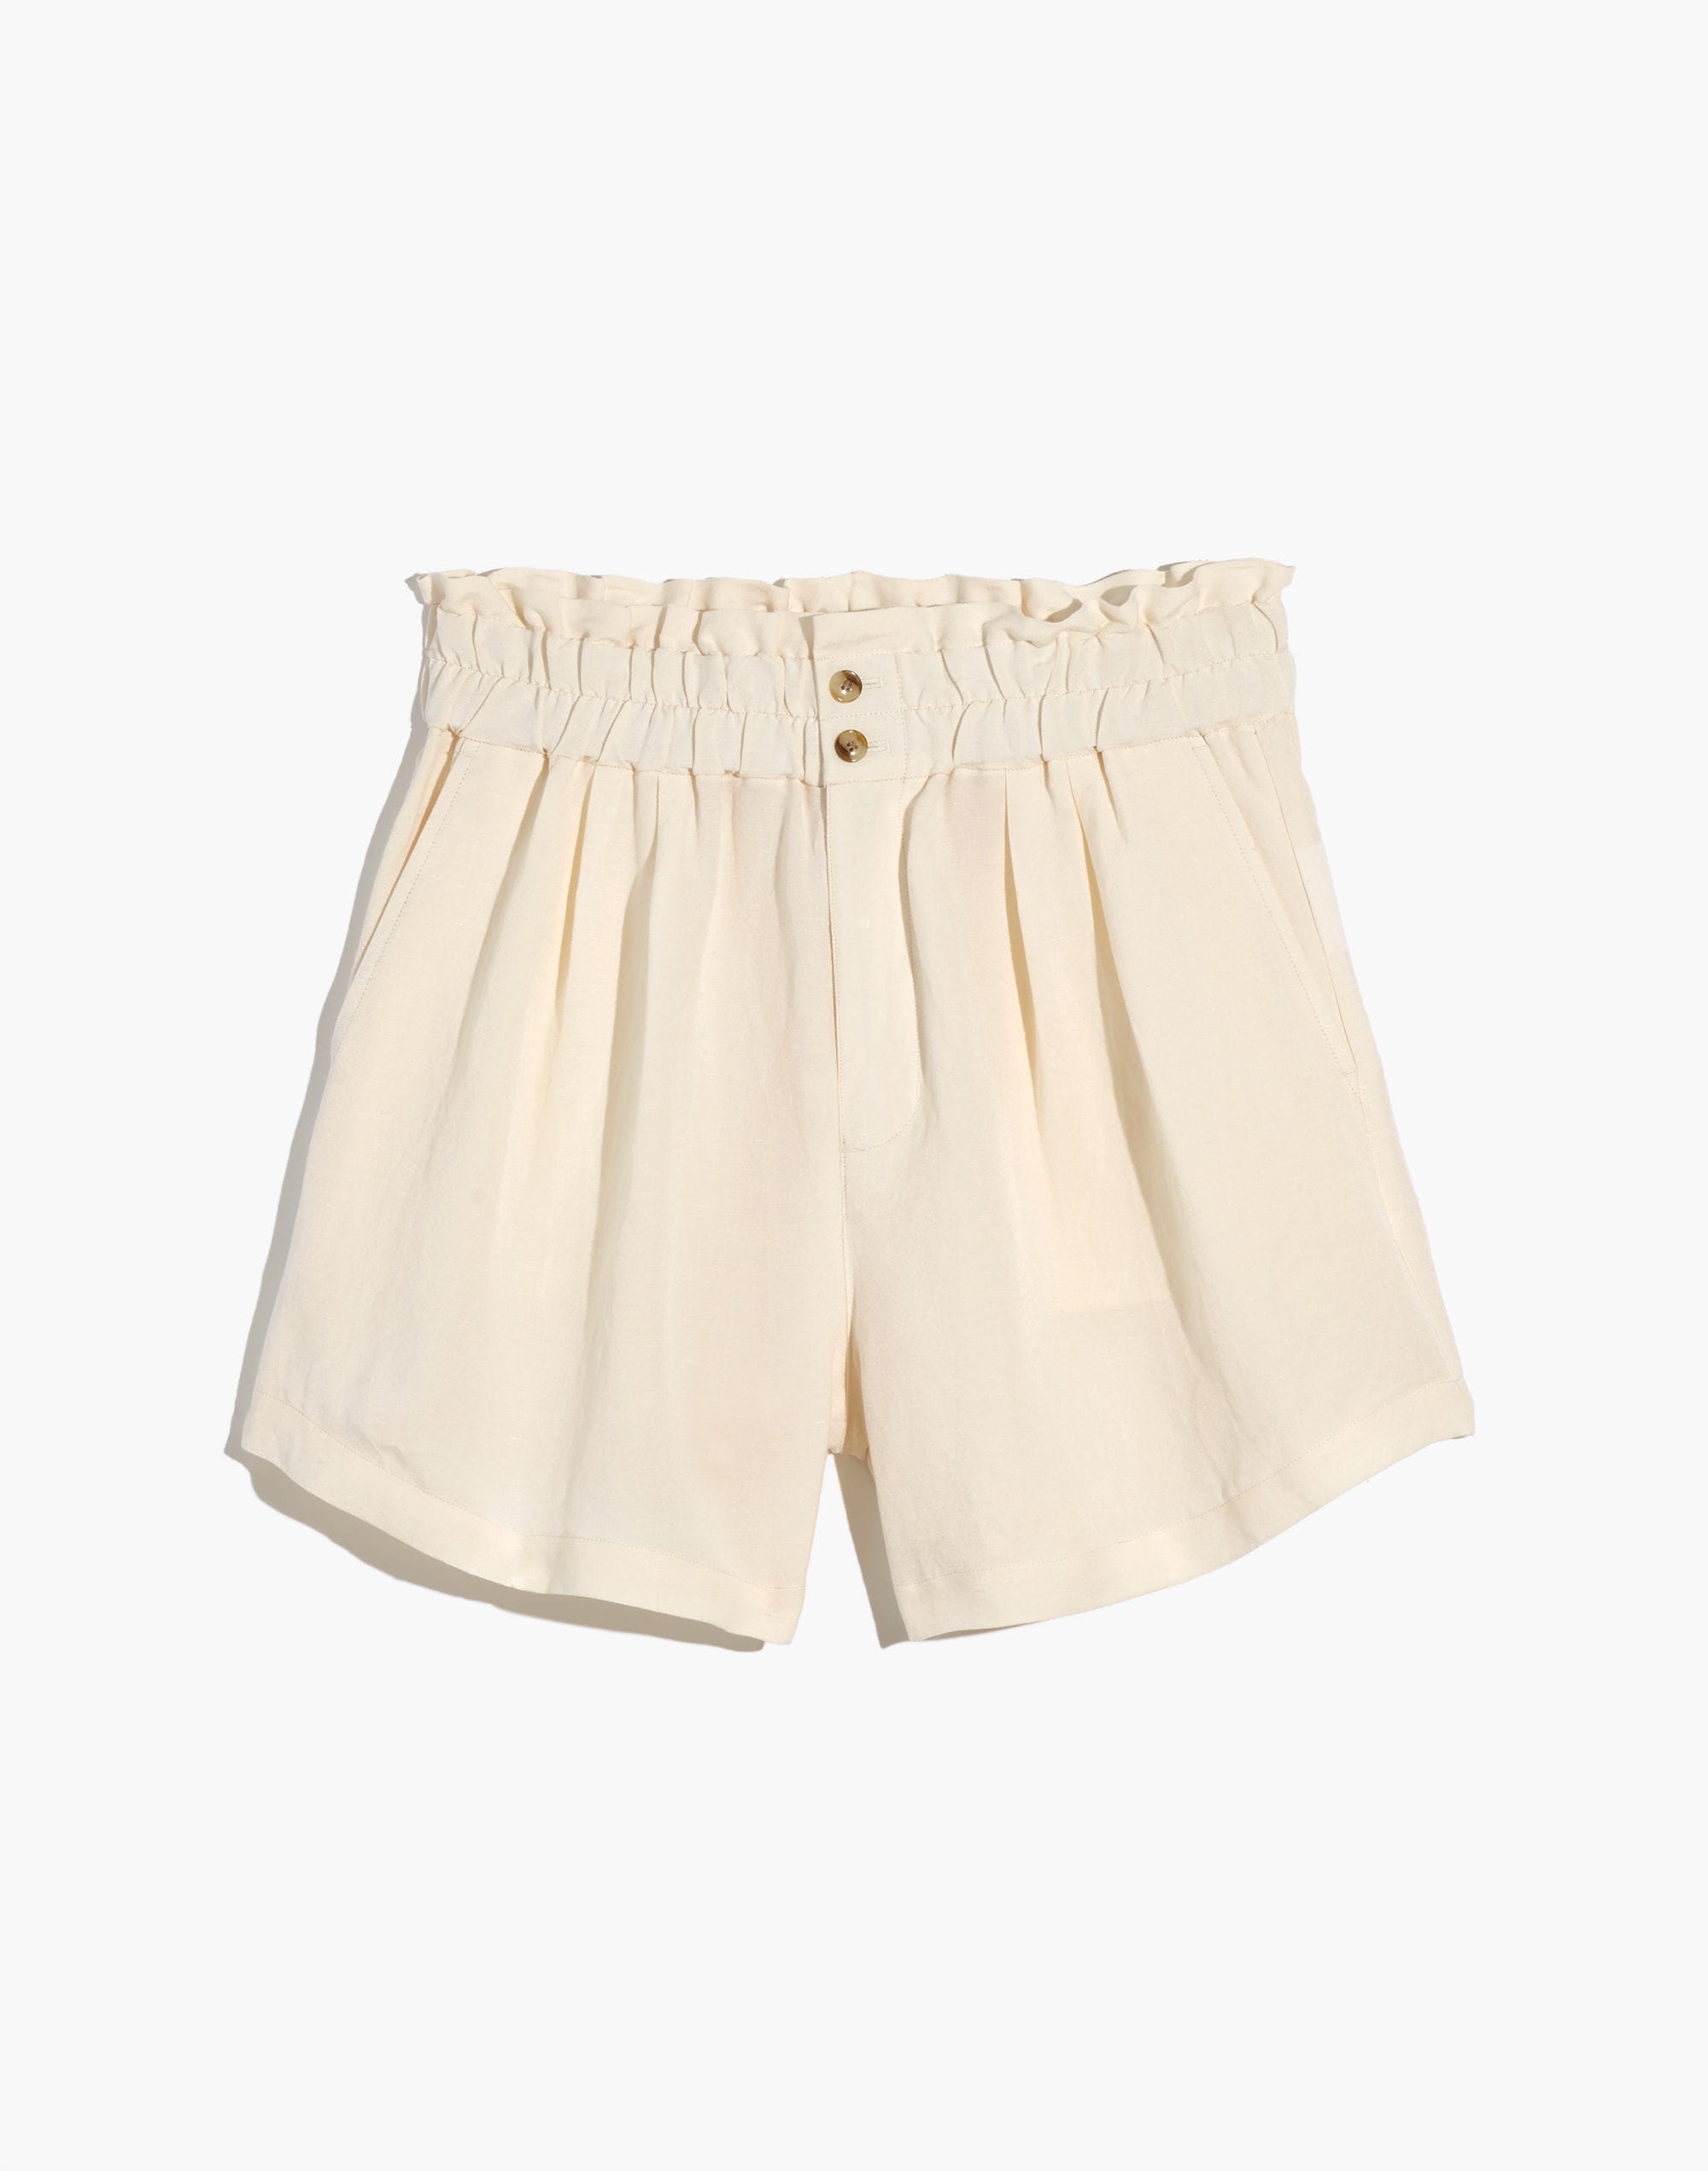 Madeline Paperbag Cotton Shorts in Off White